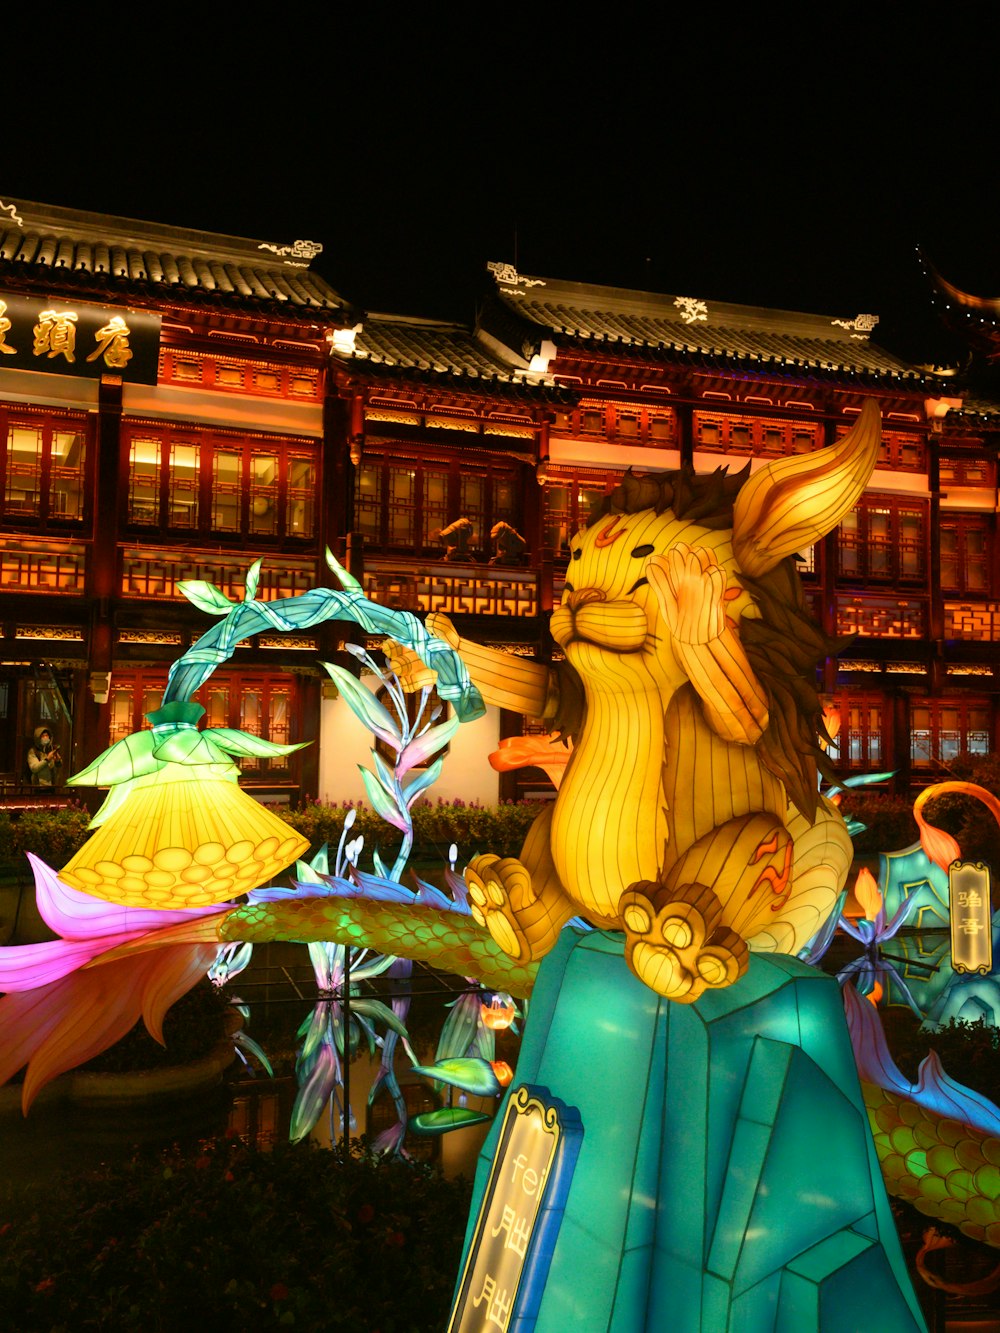 a chinese lantern festival at night with a lion and other decorations